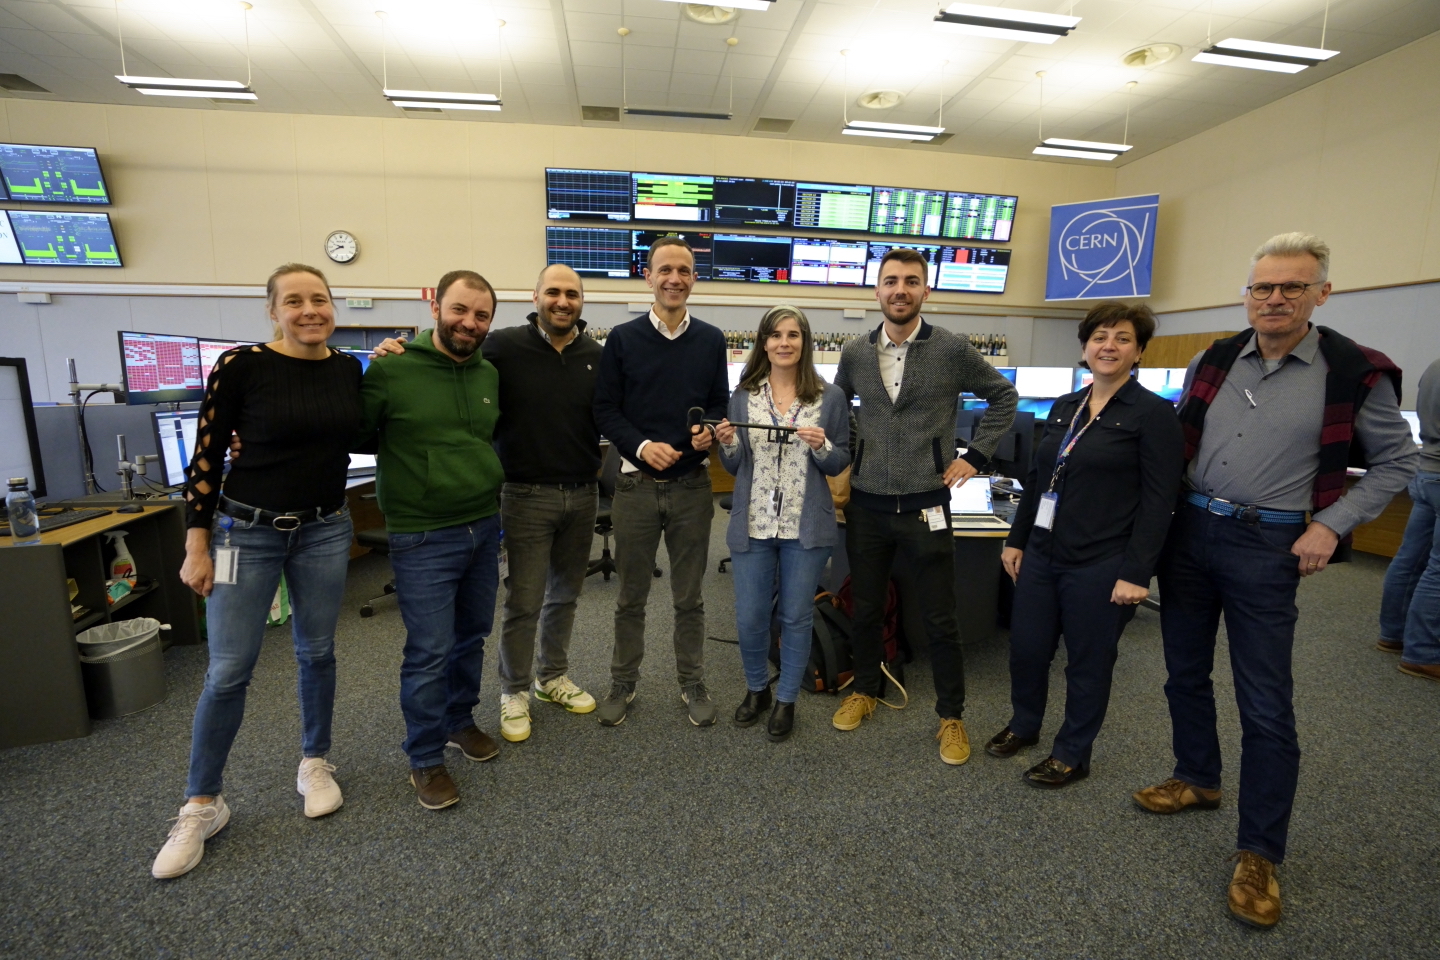 Members of CERN's Operations and ACE groups hold the symbolic LHC key 